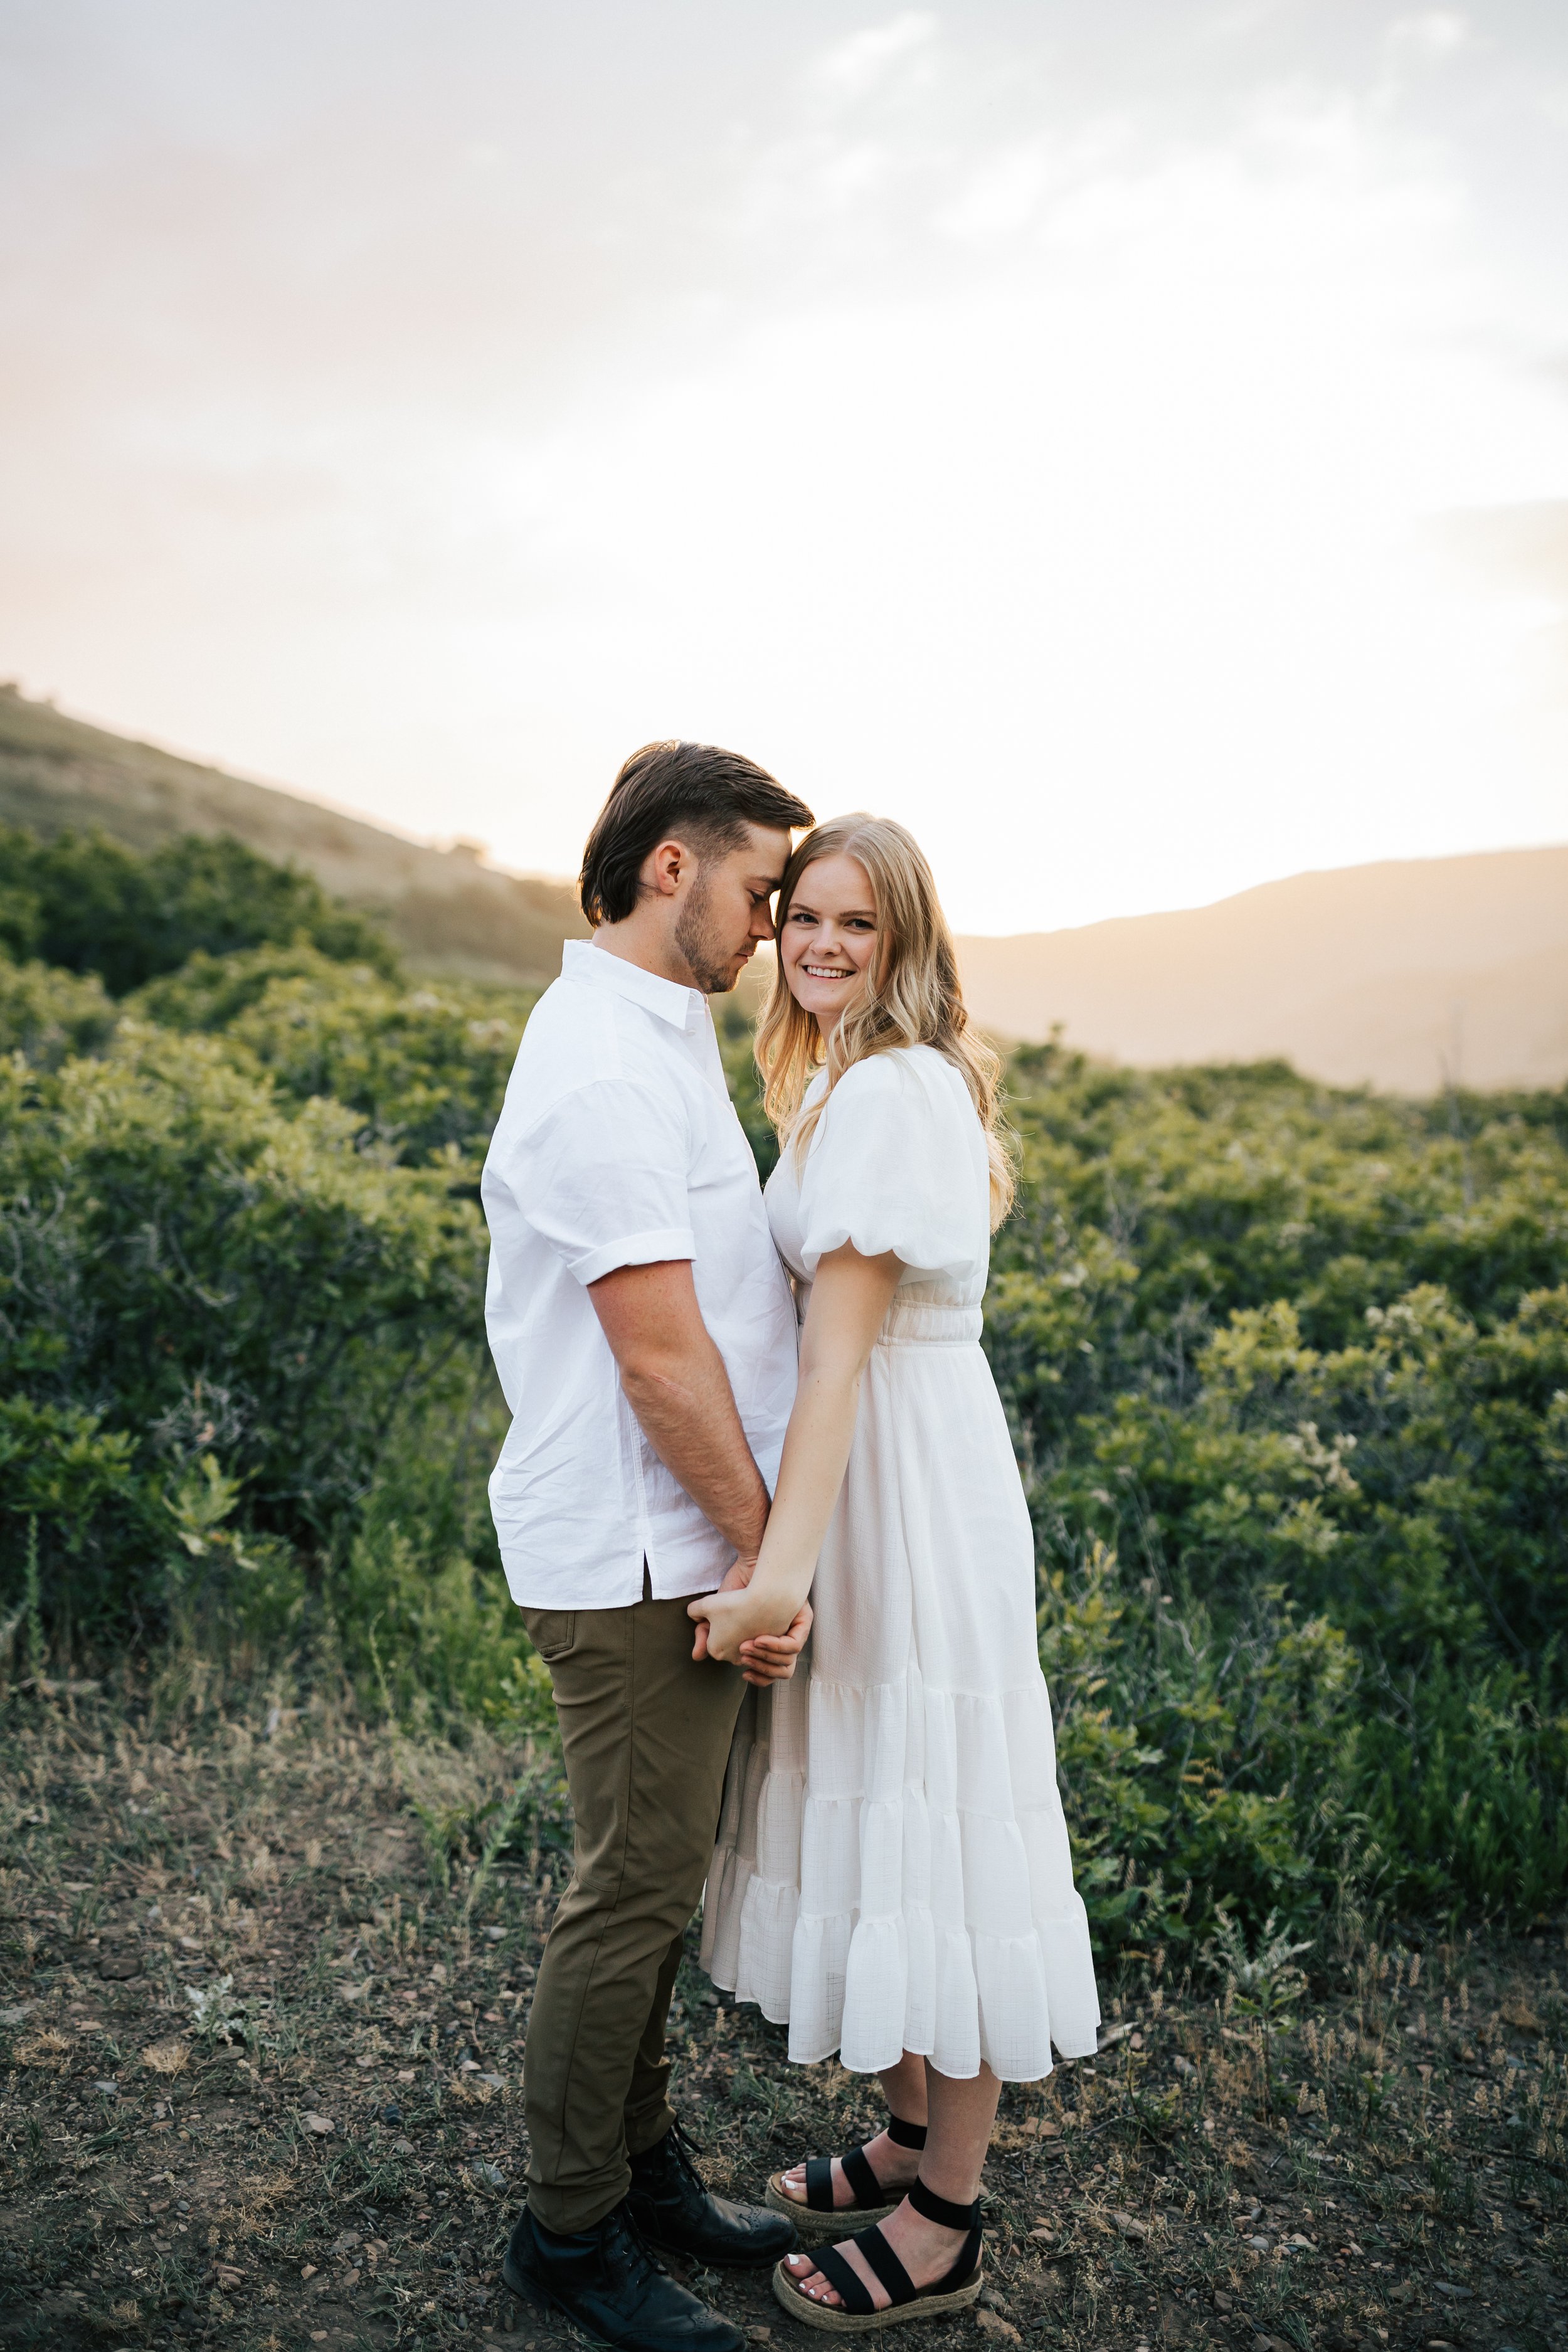  Summer anniversary couples session in the mountains. A young couple laughs together with the sun shining behind them. Utah photographer. #utahphotographer #utahengagements  